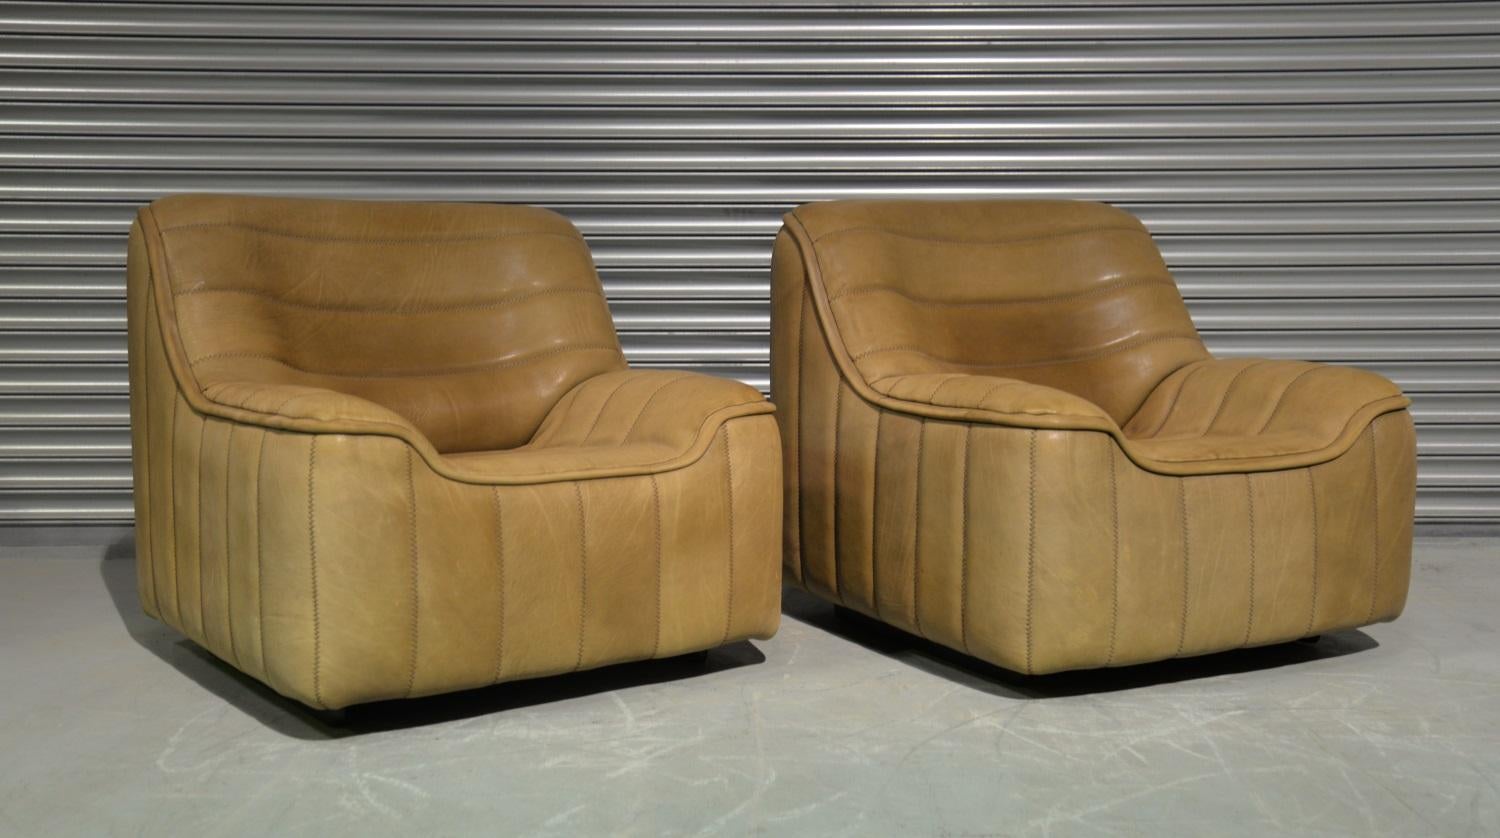 Discounted airfreight for our US and International customers (from 2 weeks door to door)

We are delighted to bring to you a pair of ultra rare vintage De Sede DS 84 armchairs. Hand built in the 1970s by De Sede craftsman in Switzerland, these